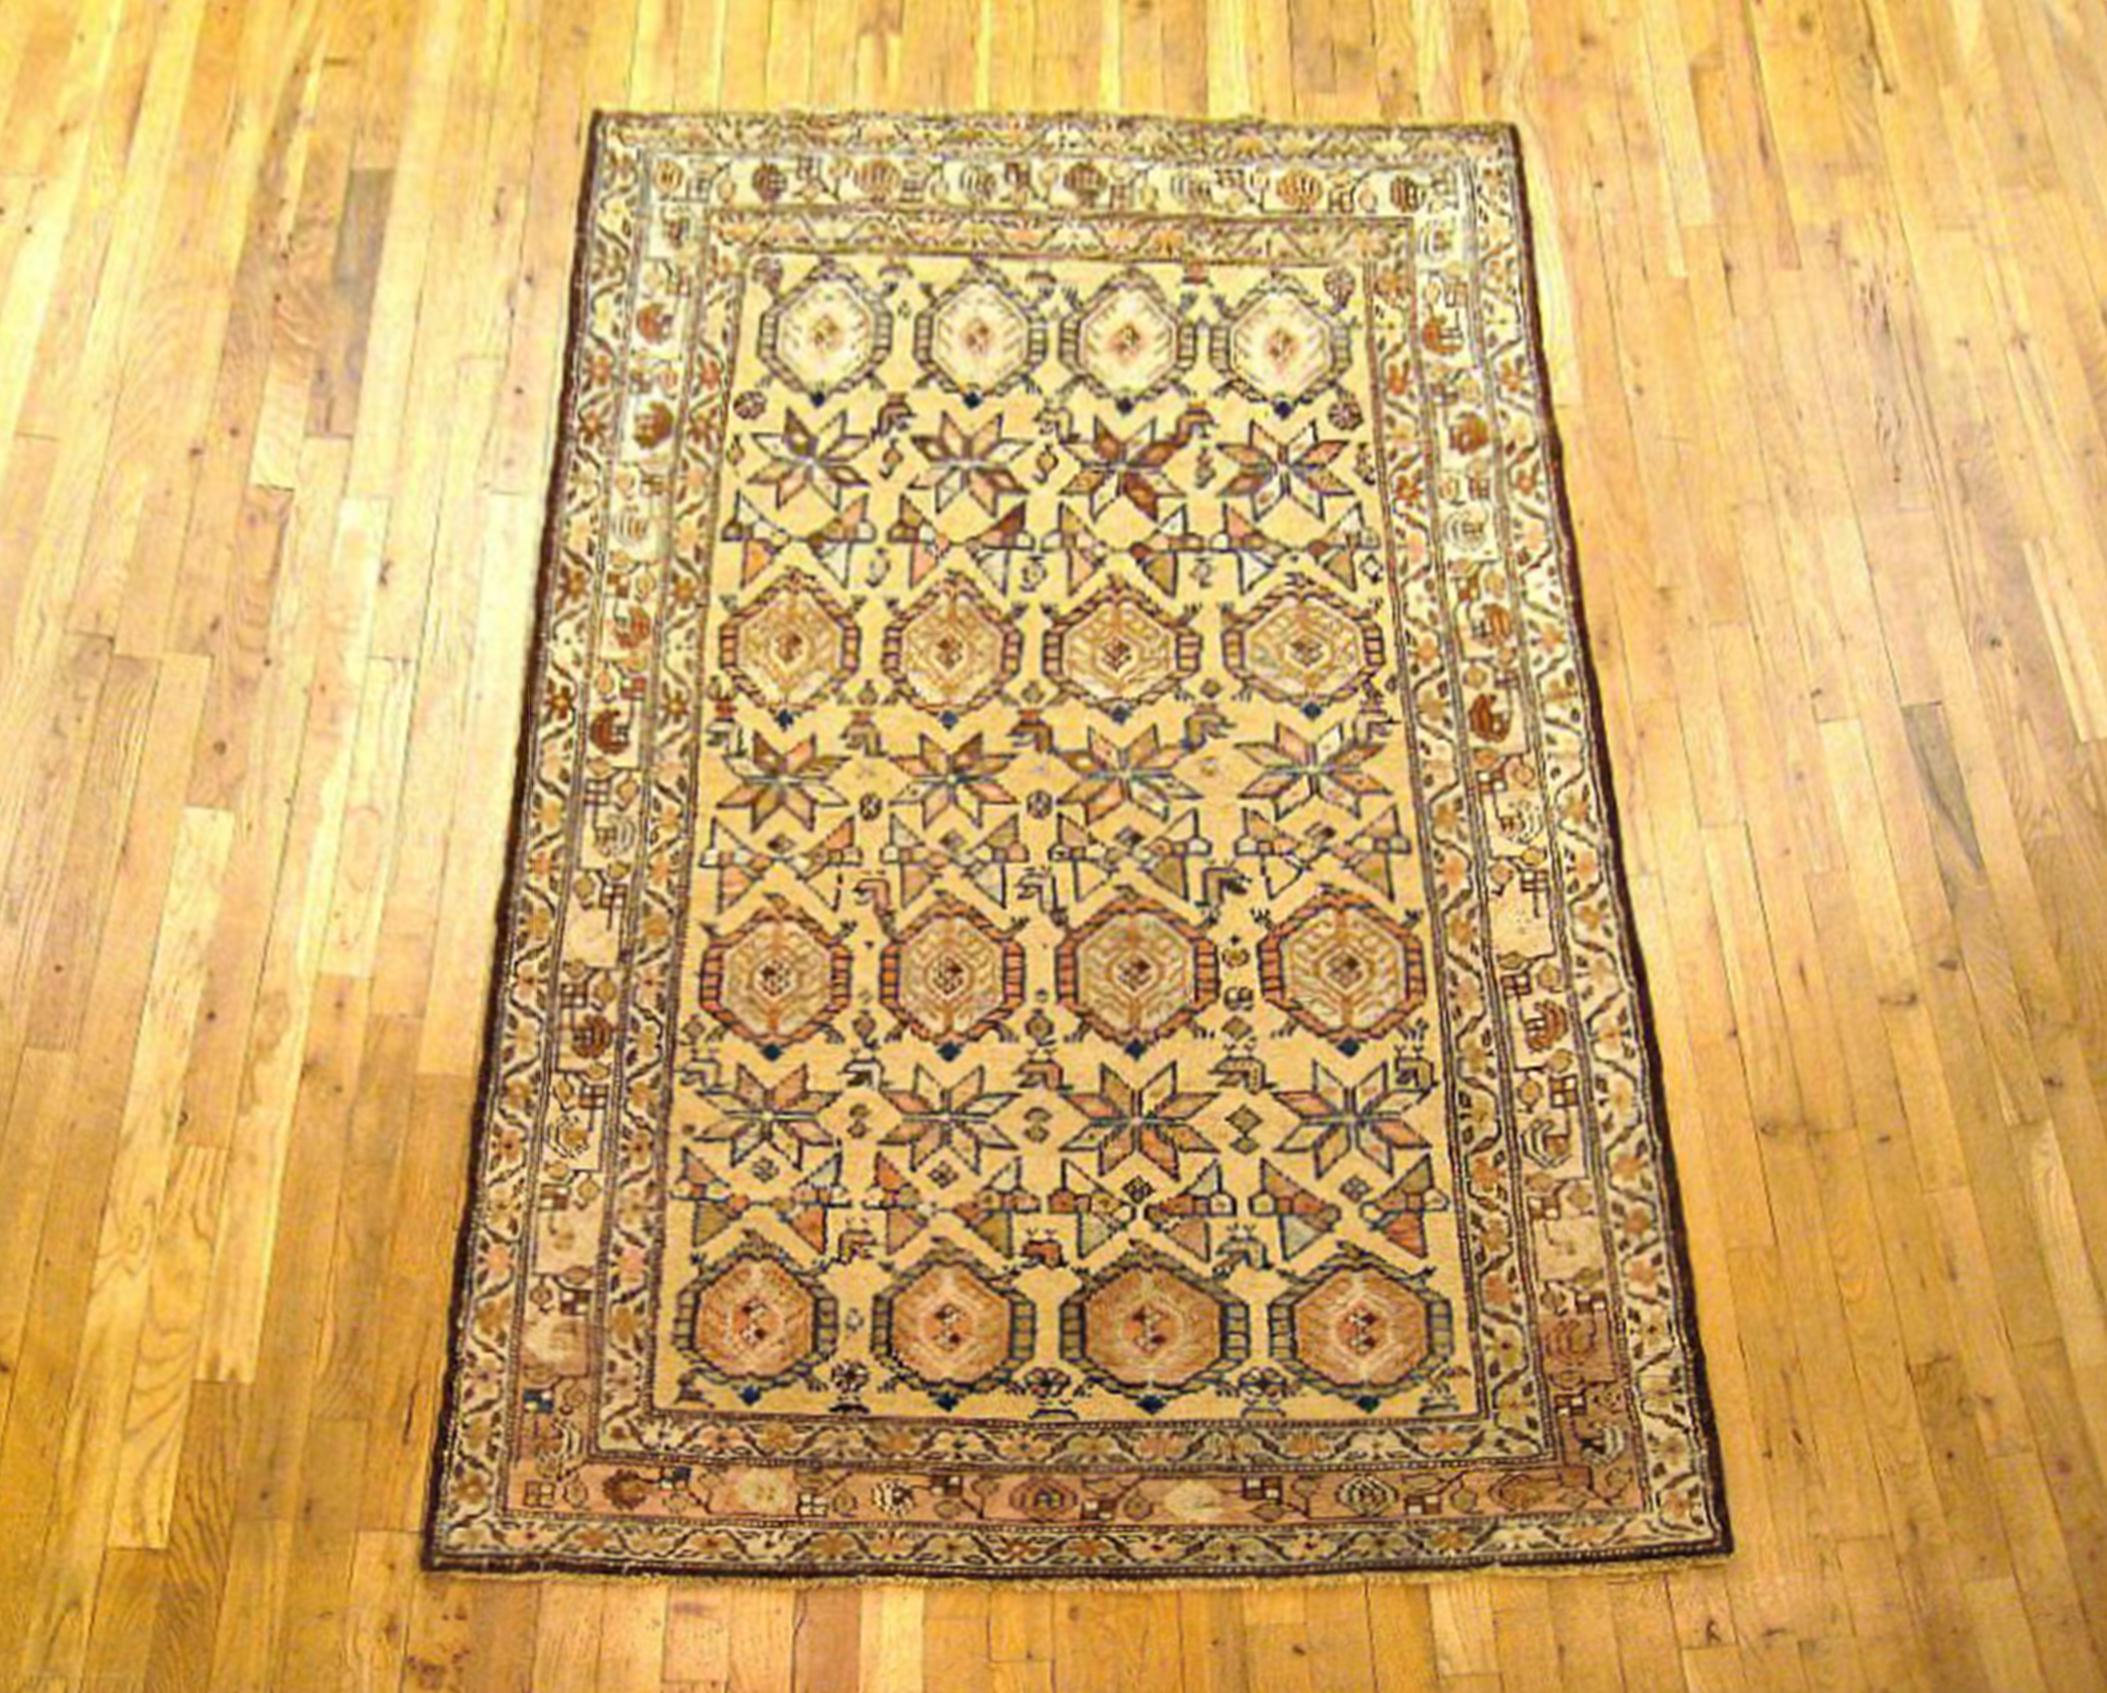 Antique Persian Kurd Rug, Small size, circa 1900

A one-of-a-kind antique Persian Kurd Oriental Carpet,  hand-knotted with soft wool pile. This rug features a Paisley design allover the light blue primary field, with a brown outer border. In small